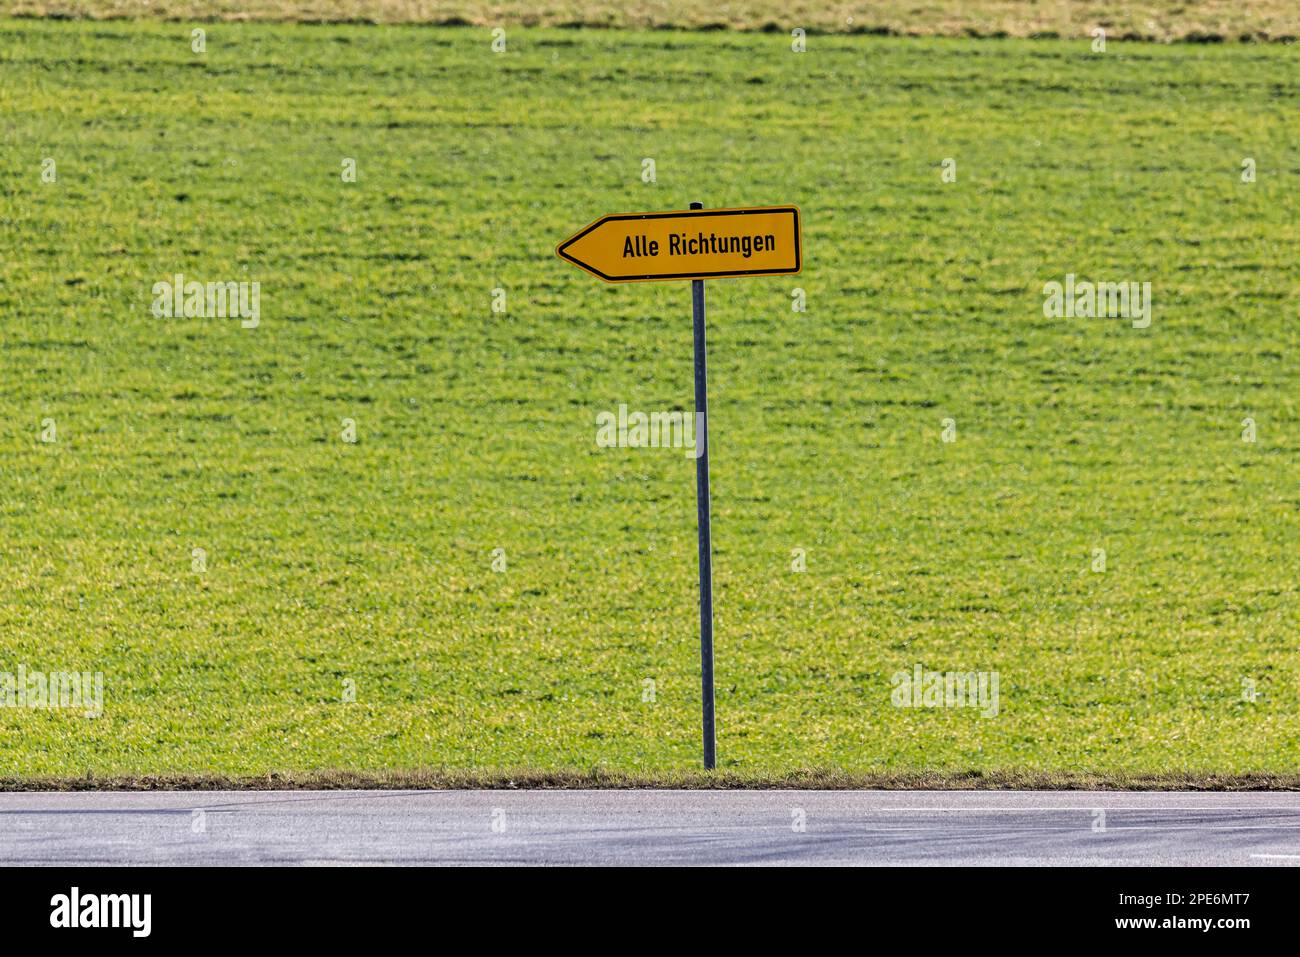 Traffic sign, a direction arrow points in all directions, symbol photo, Illingen, Baden-Wuerttemberg, Germany Stock Photo